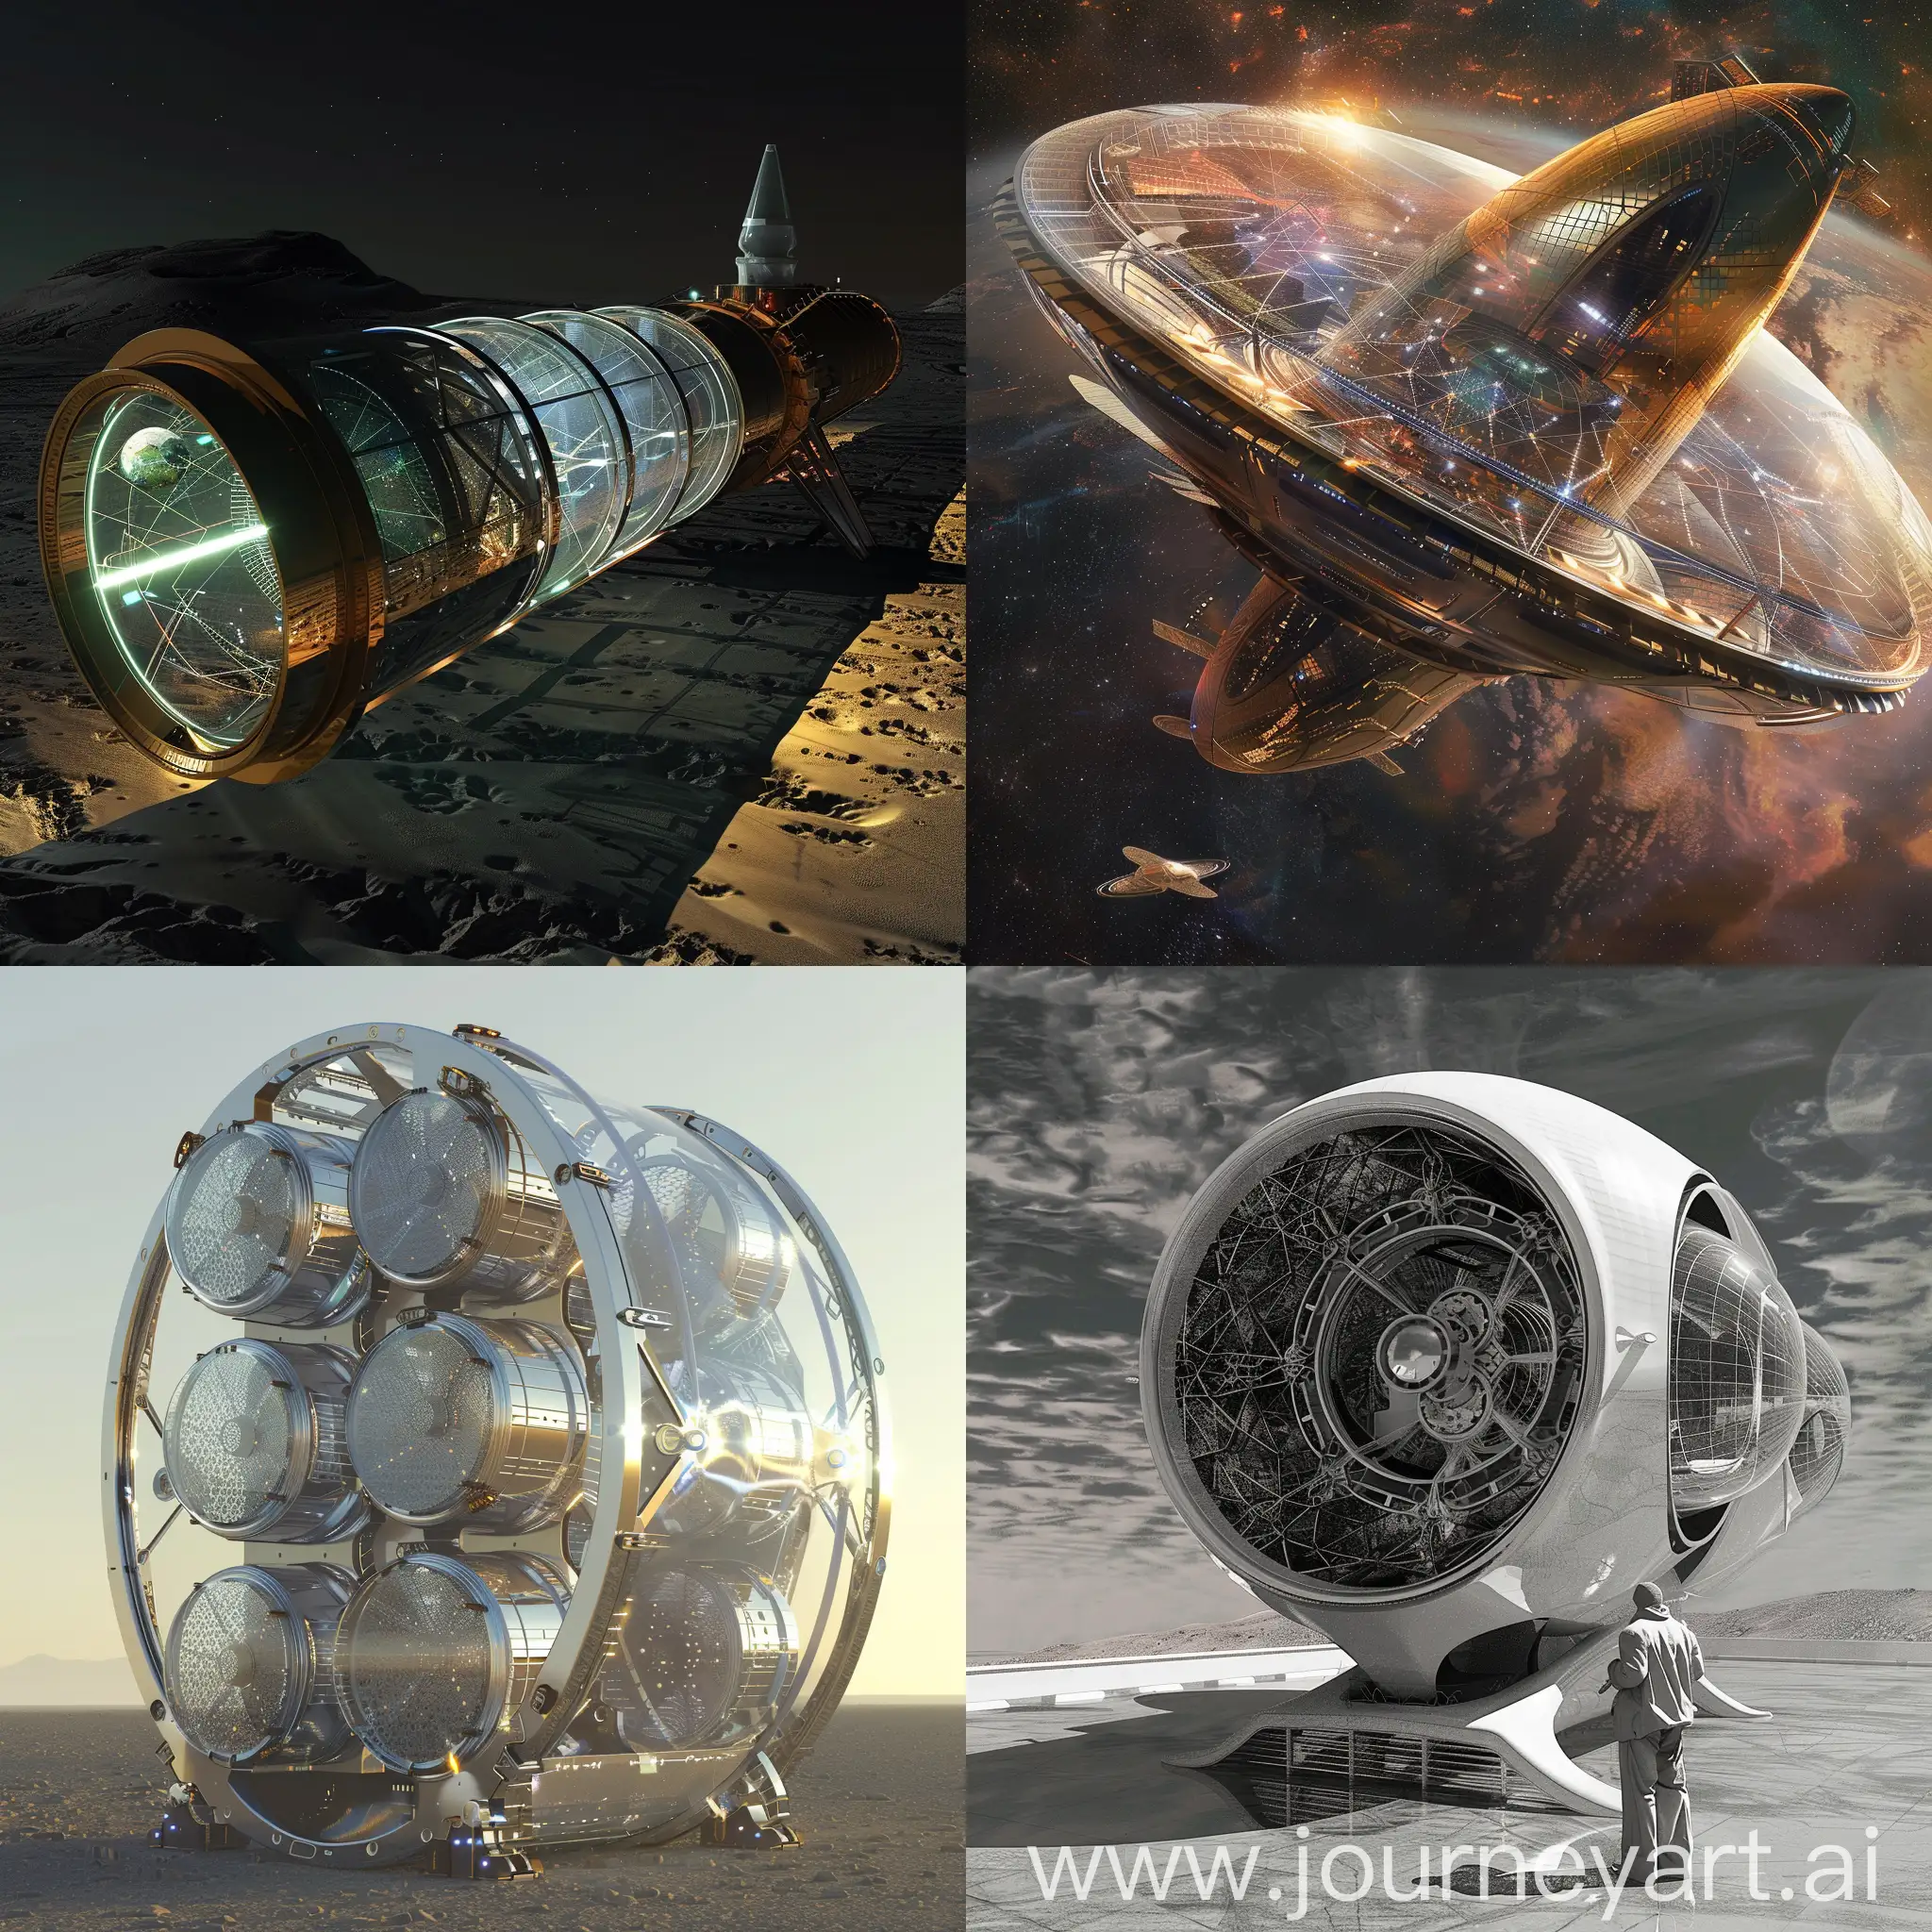 Sci-Fi space telescope, Advanced Science and Technology inspired by futurism, Modular Construction (Sectional Disks), Organic, Streamlined Tubing, Integrated Holographic Displays, Biometric User Interface, Self-Healing Materials, Artificial Intelligence Core, Nanotech-Based Components, Kinetic Cooling System, Advanced Power Generation, Dynamic Lighting System, Self-Deploying Structures, Aerodynamic Solar Sails, Adaptive Mirror Segments, Metamaterial Hull, Quantum Communication Arrays, AI-Enhanced Surface, 3D-Printed Exoskeleton, Holographic Projectors, Kinetic Energy Harvesters, Interactive Data Visualization Interfaces, In Unreal Engine 5 Style --stylize 1000